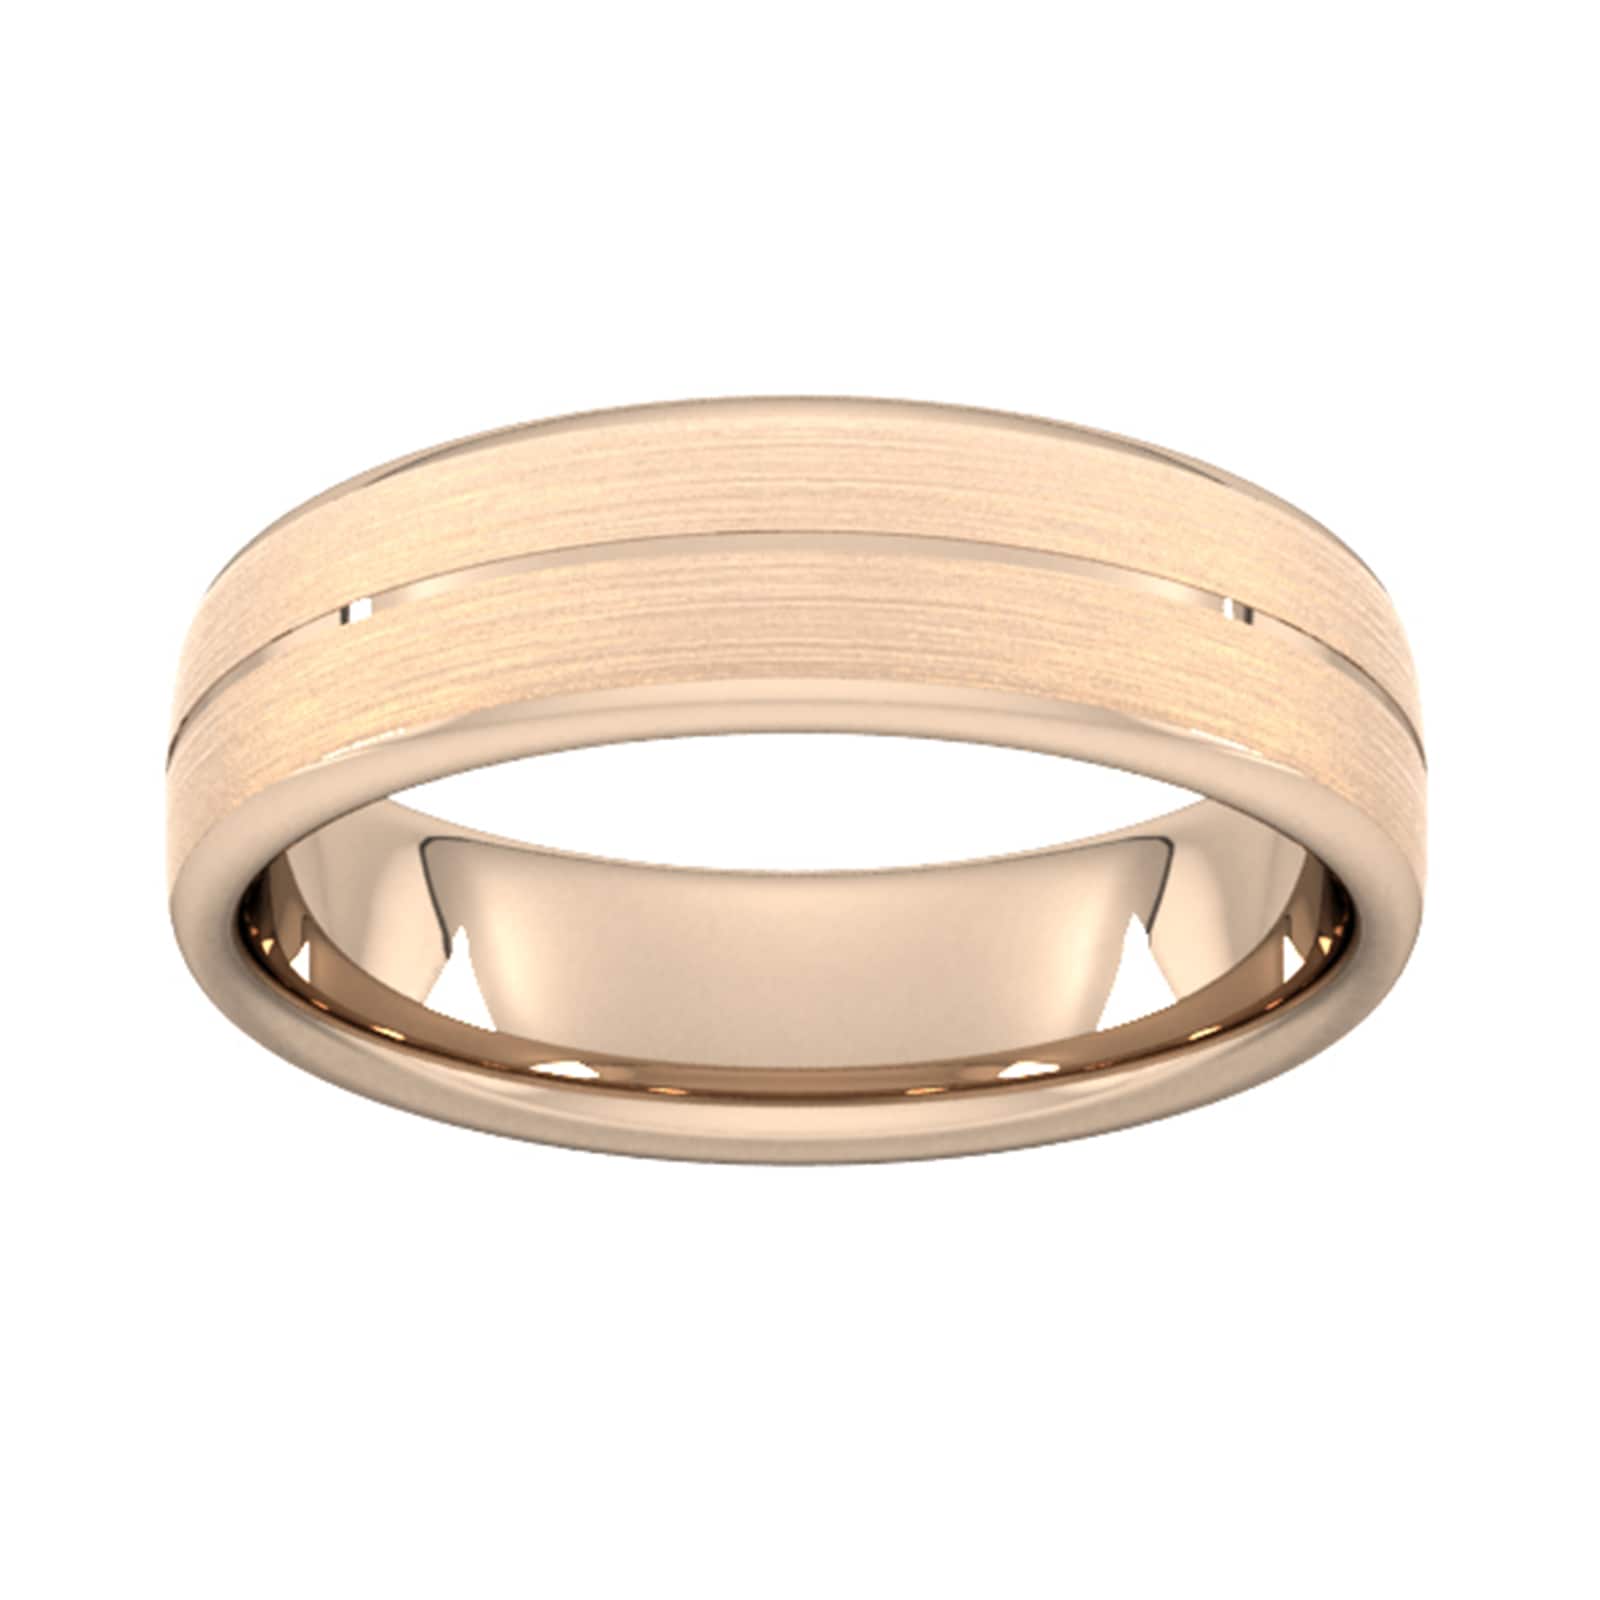 6mm Slight Court Heavy Centre Groove With Chamfered Edge Wedding Ring In 18 Carat Rose Gold - Ring Size O